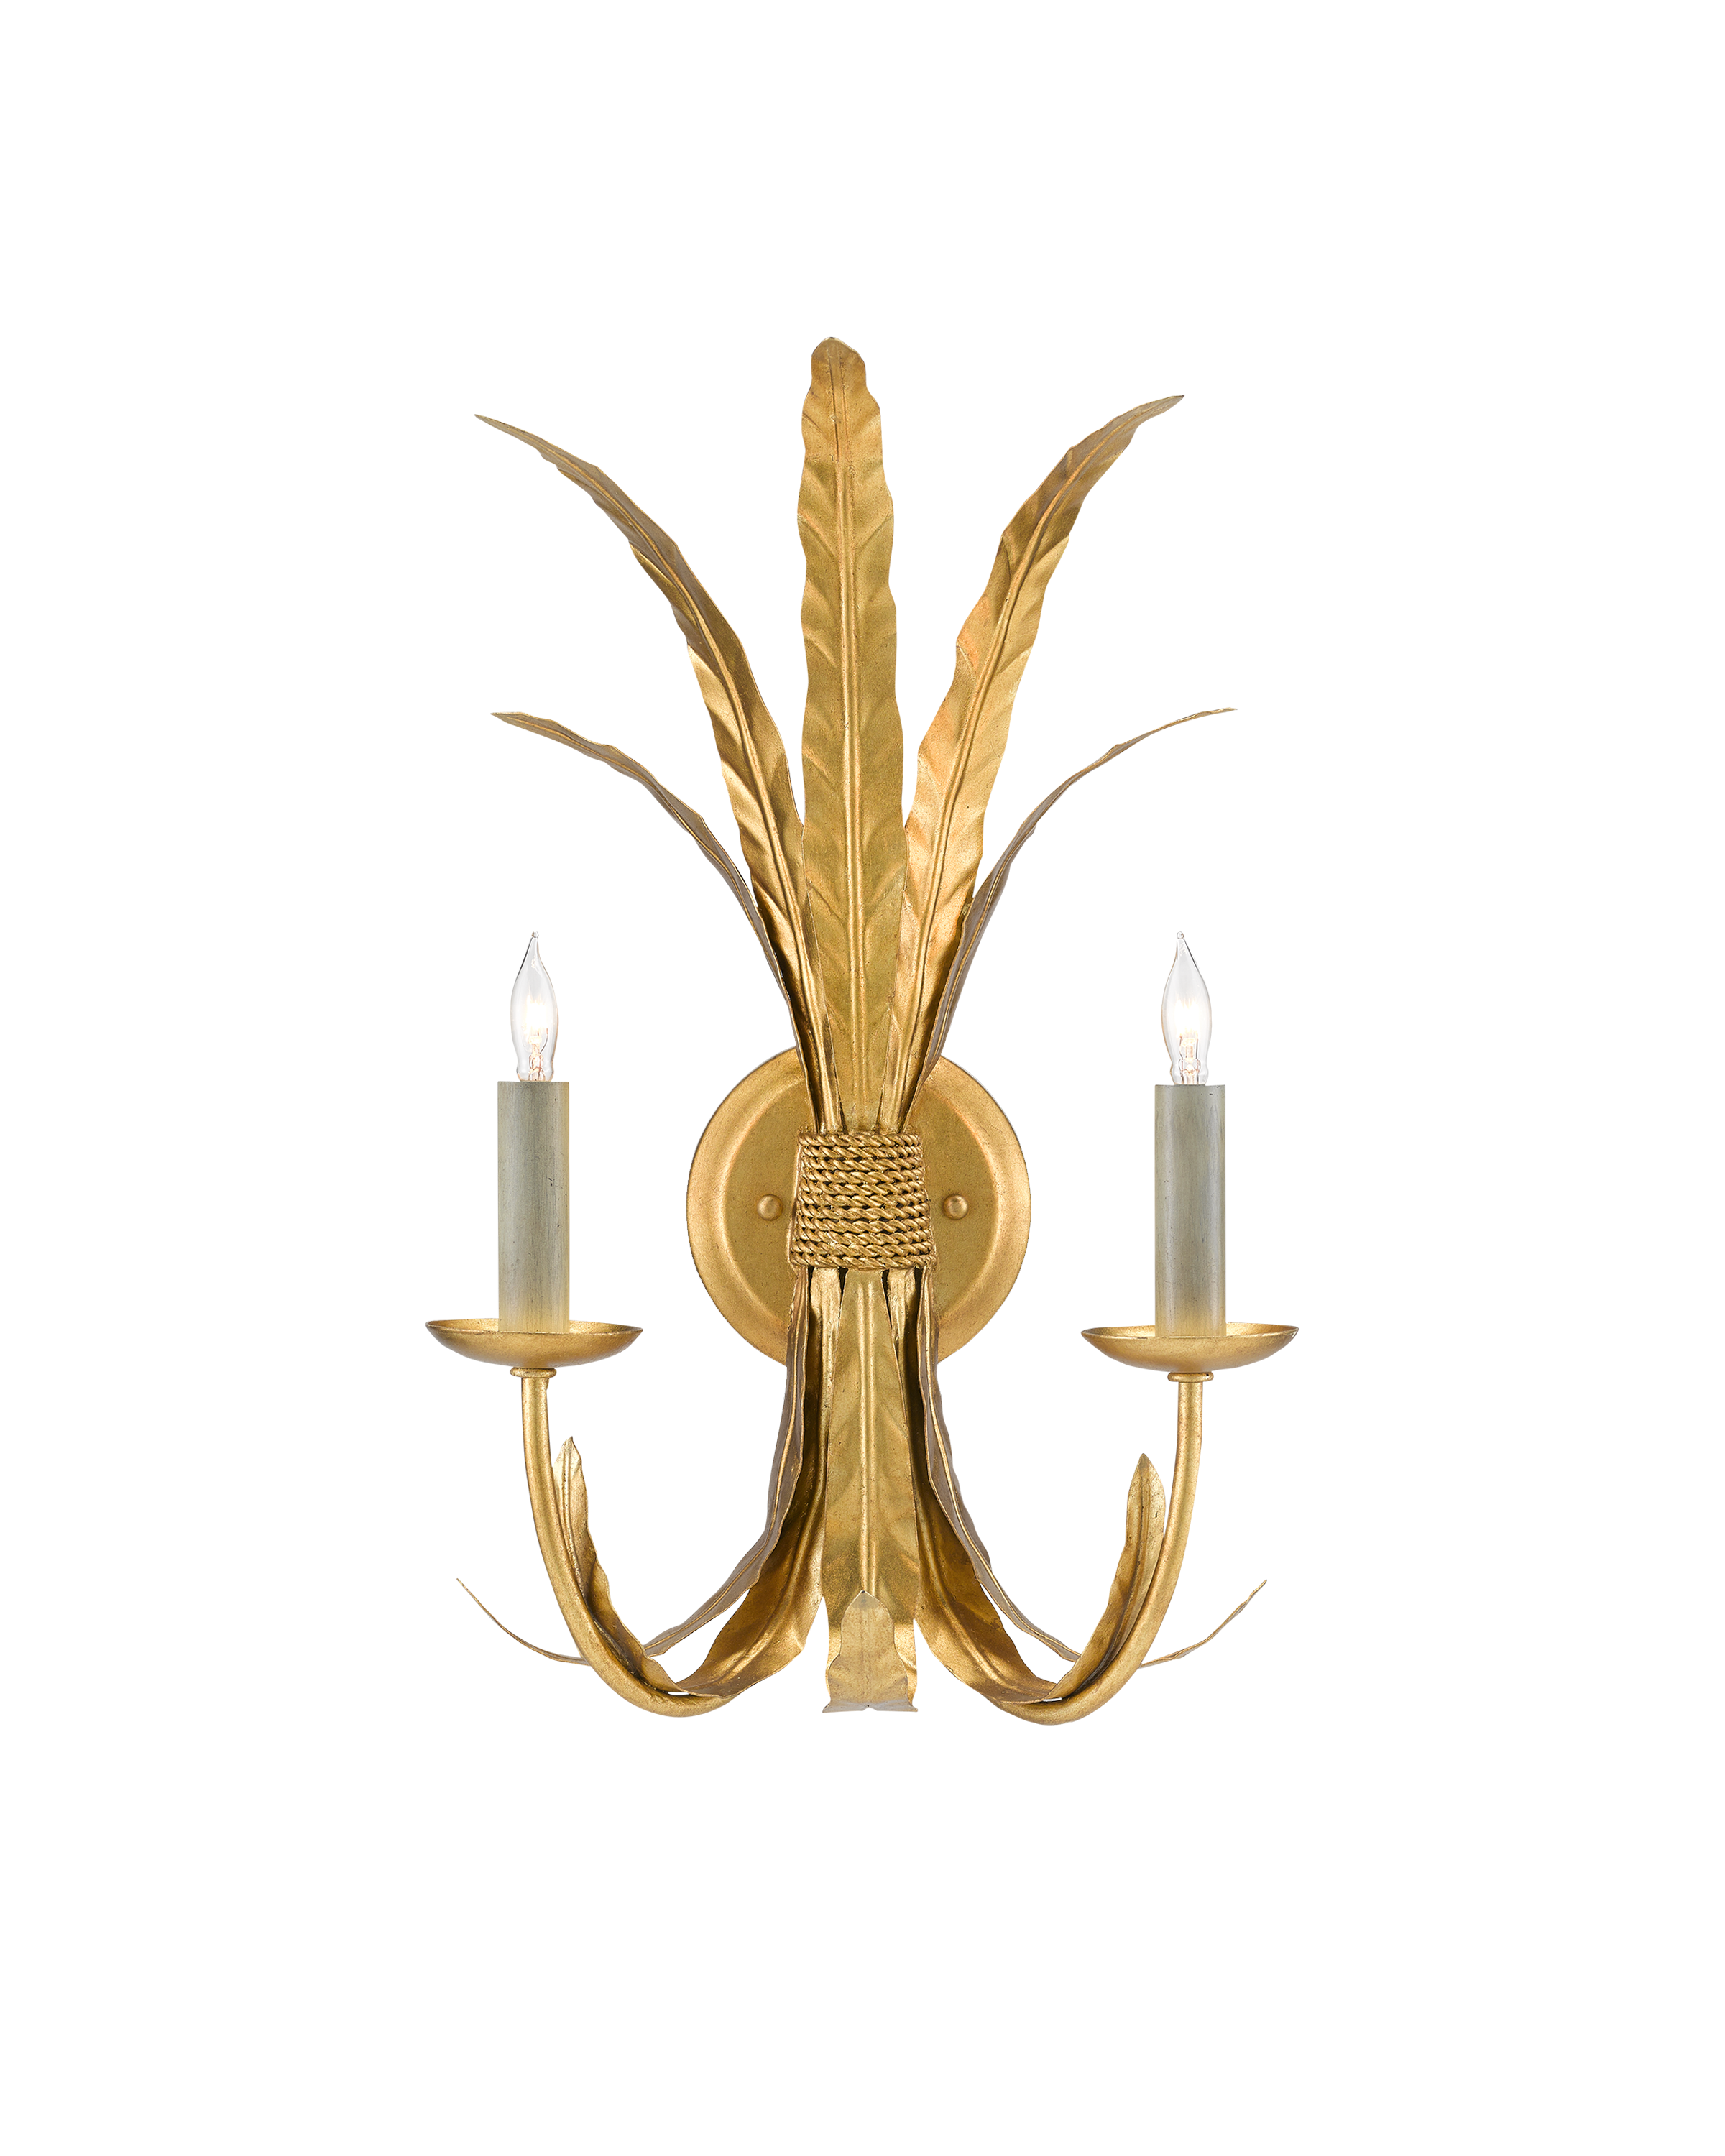 Bette Gold Wall Sconce